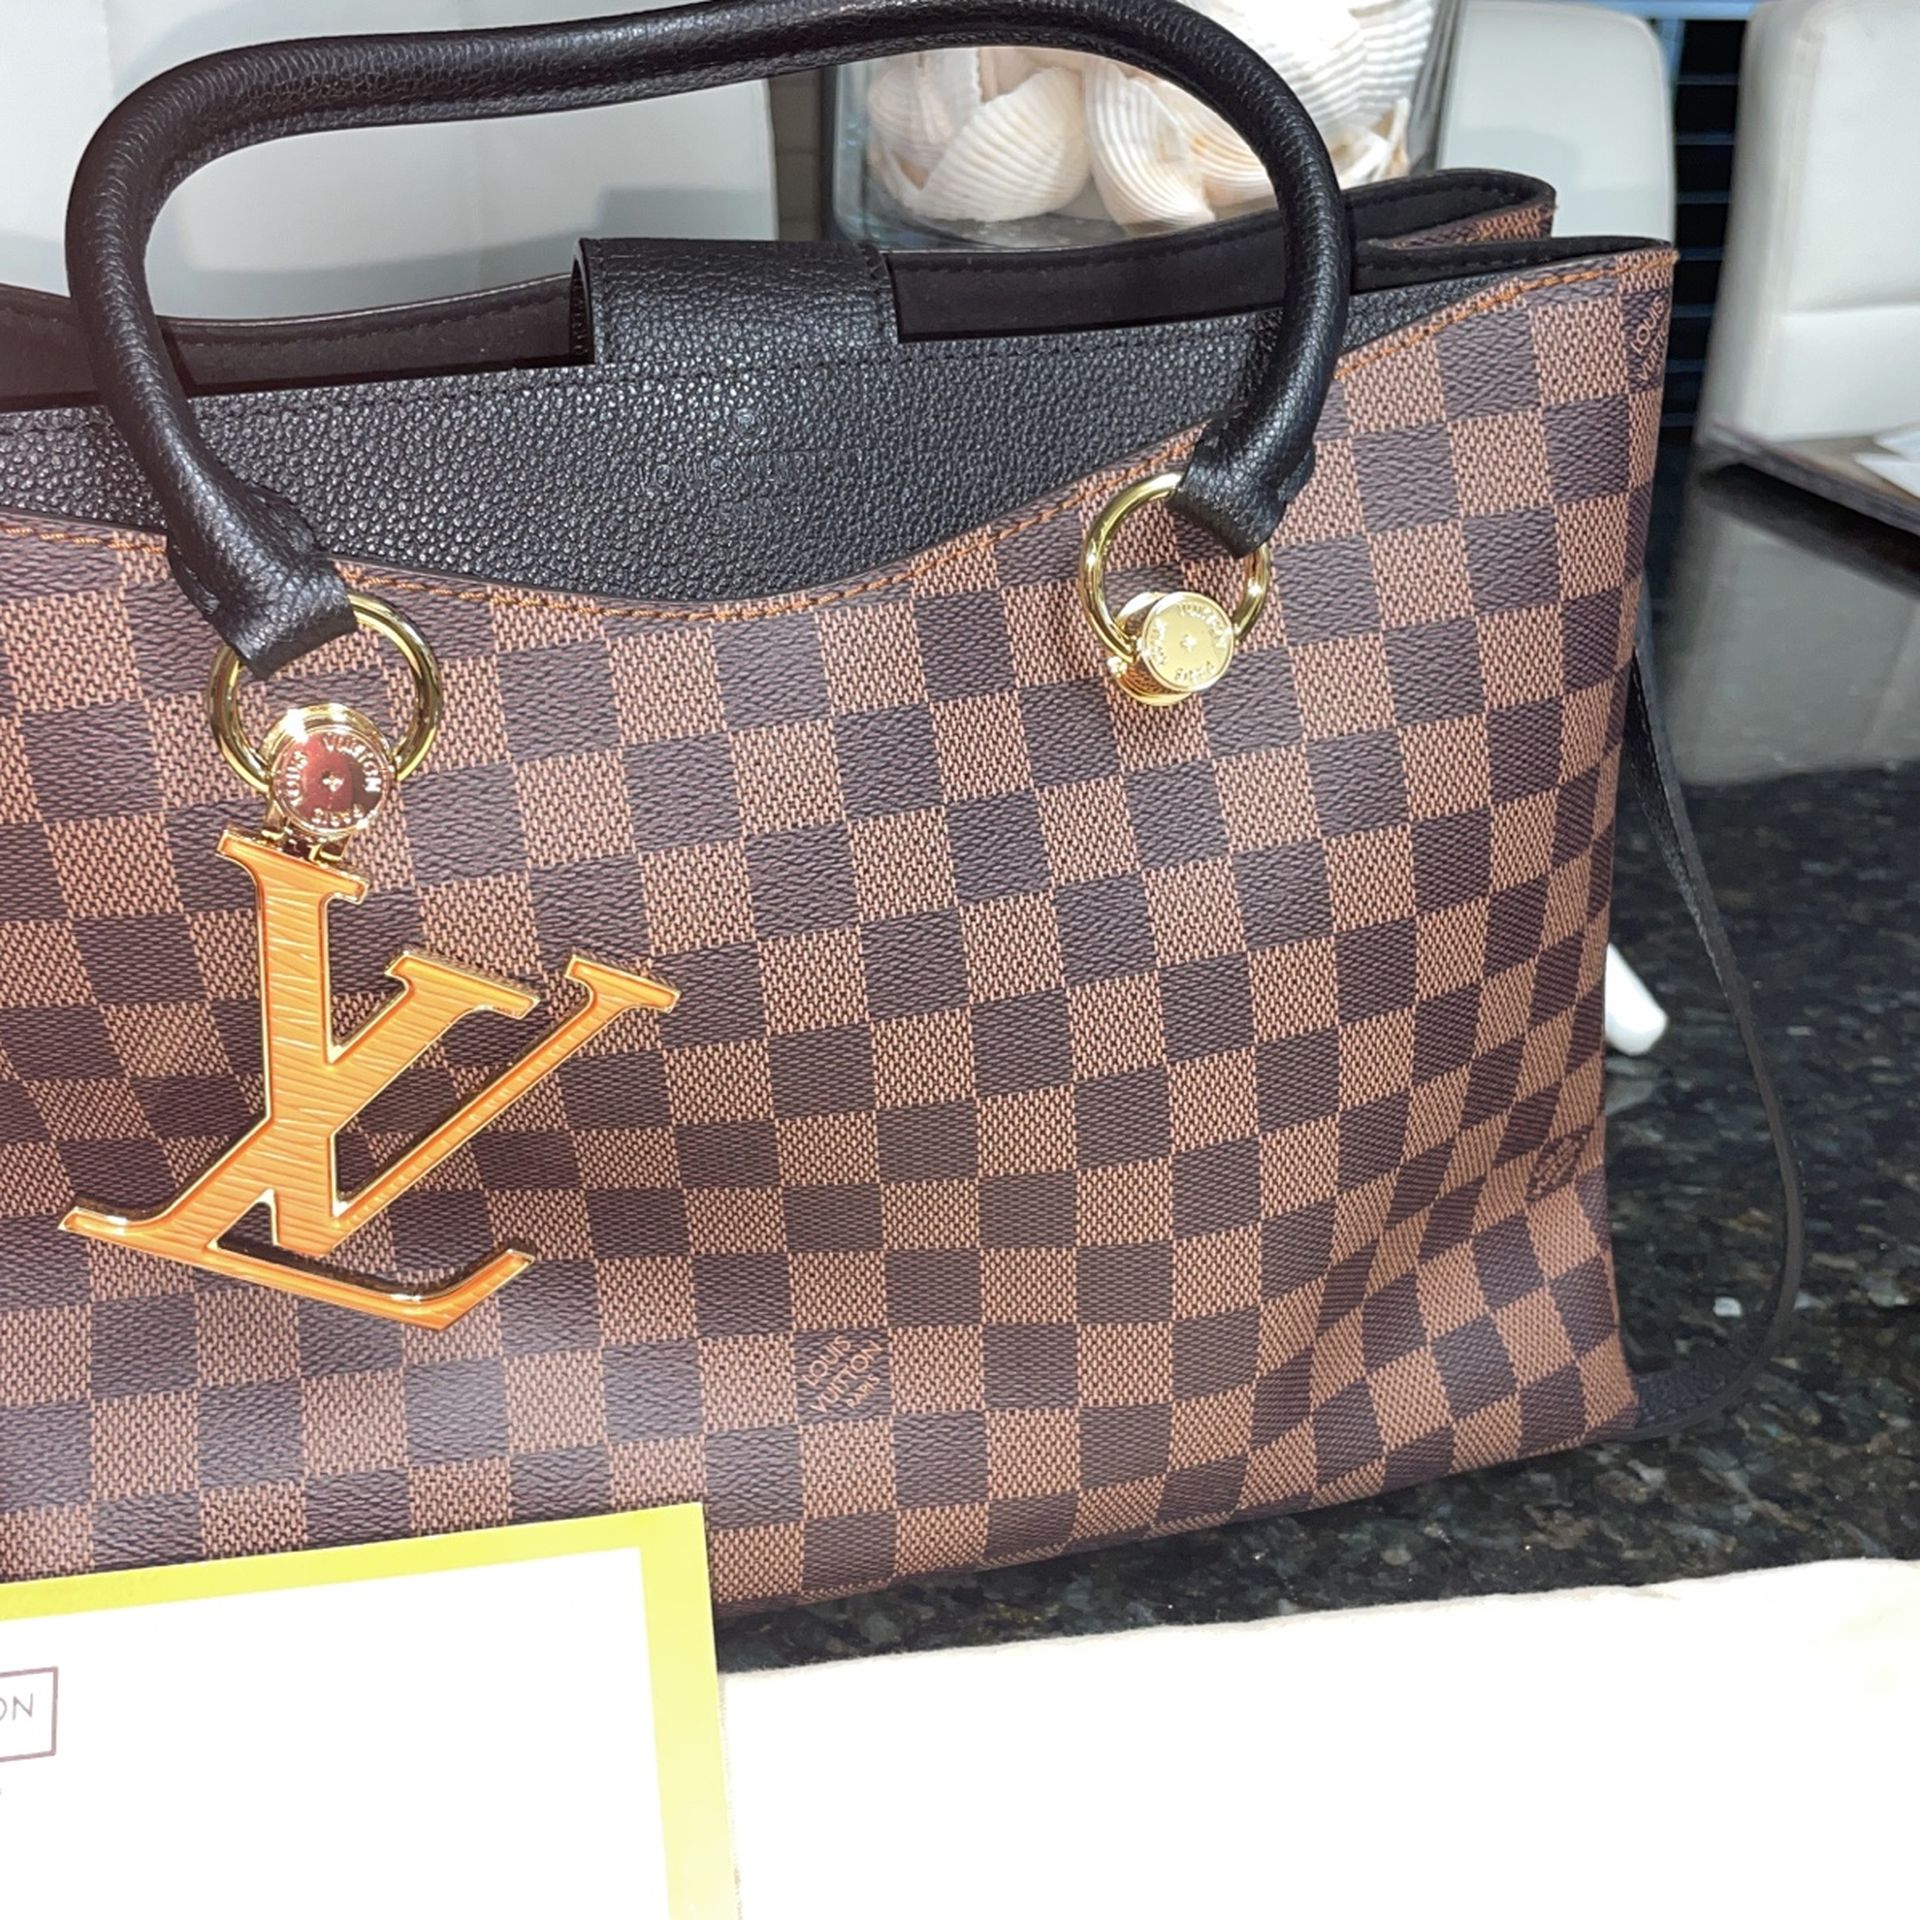 Real Louis Vuitton Items. Taking Best Offer Name A Price